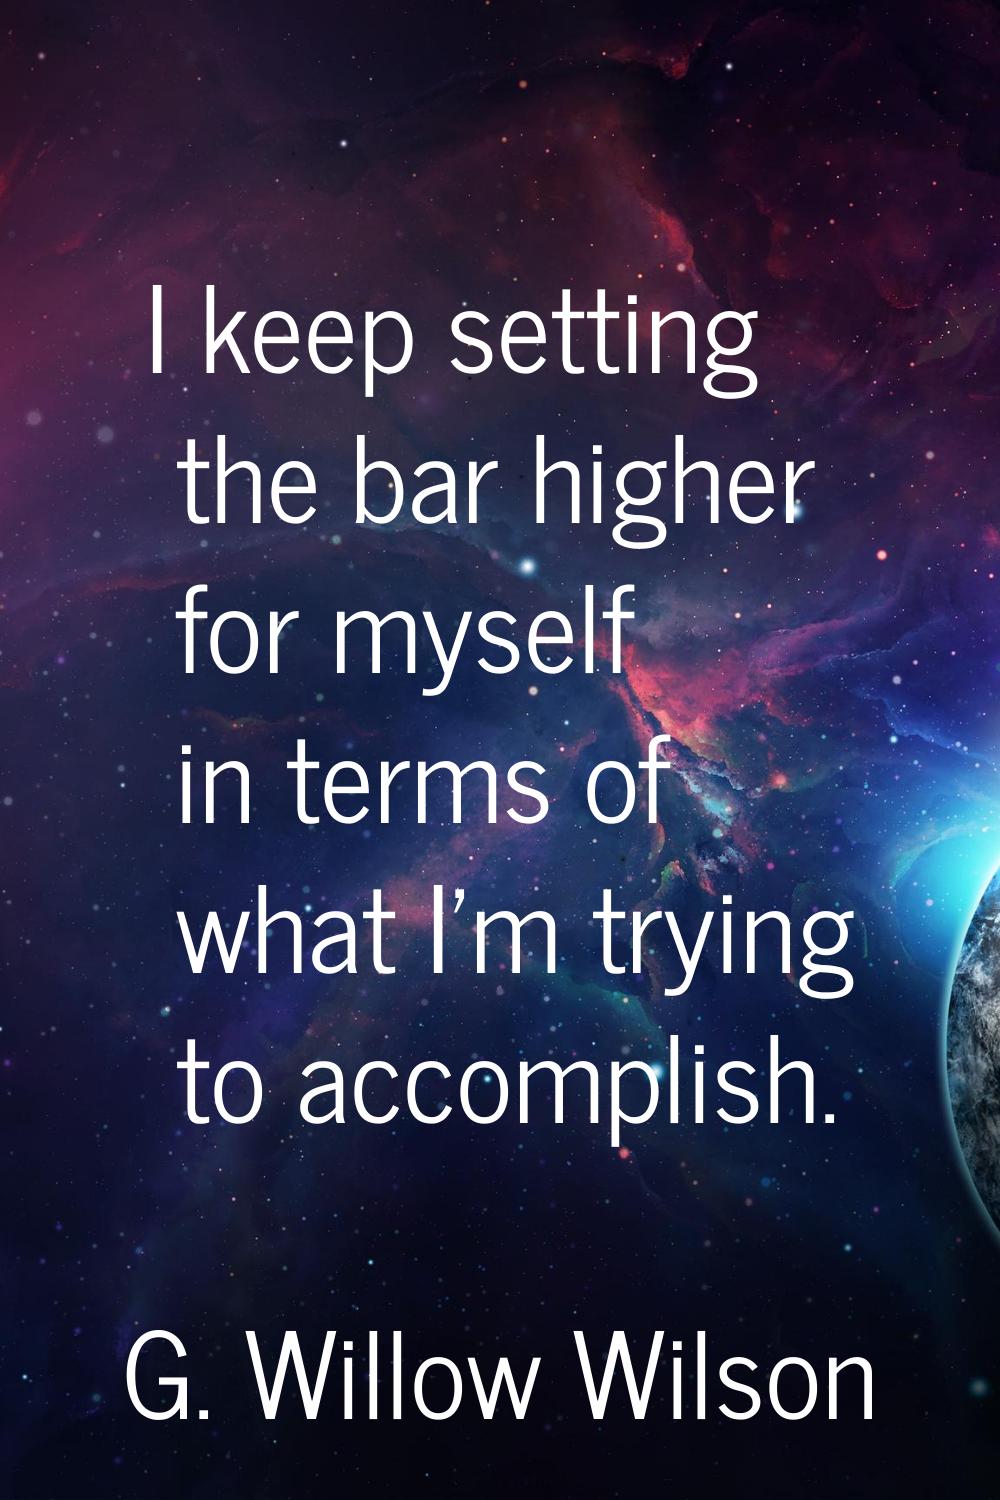 I keep setting the bar higher for myself in terms of what I'm trying to accomplish.